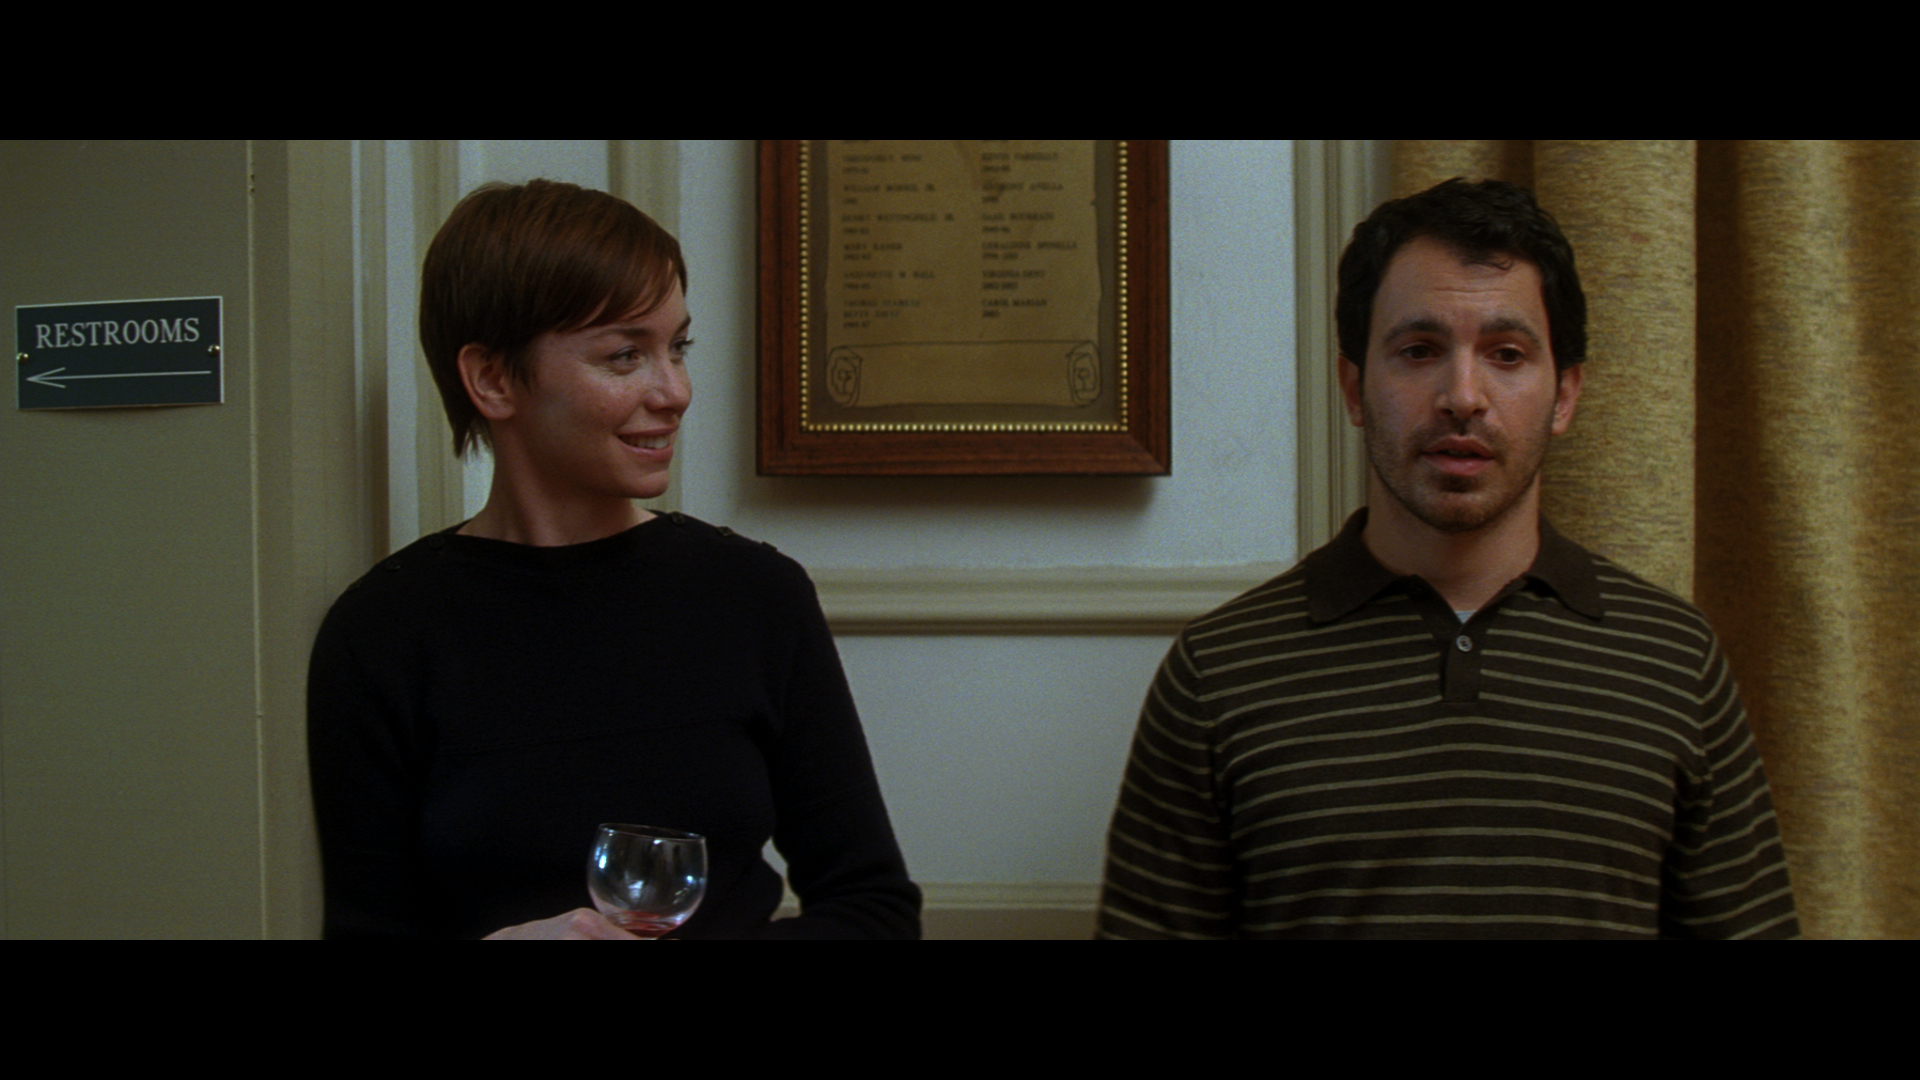 Still of Chris Messina and Julianne Nicholson in Brief Interviews with Hideous Men (2009)